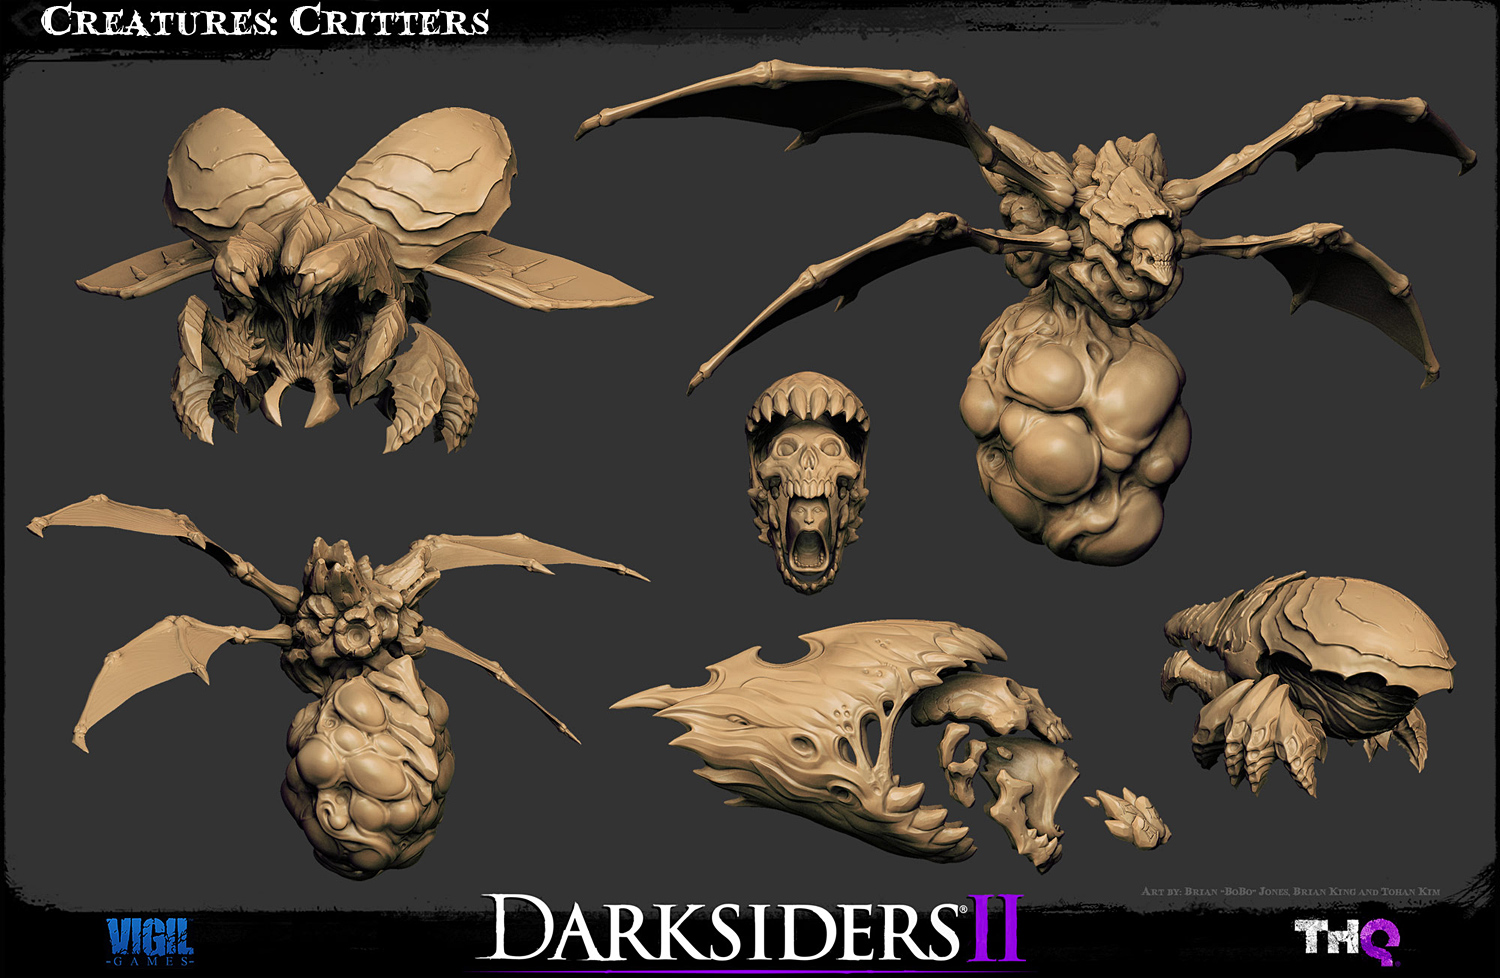 DS2_Creatures_Critters.jpg